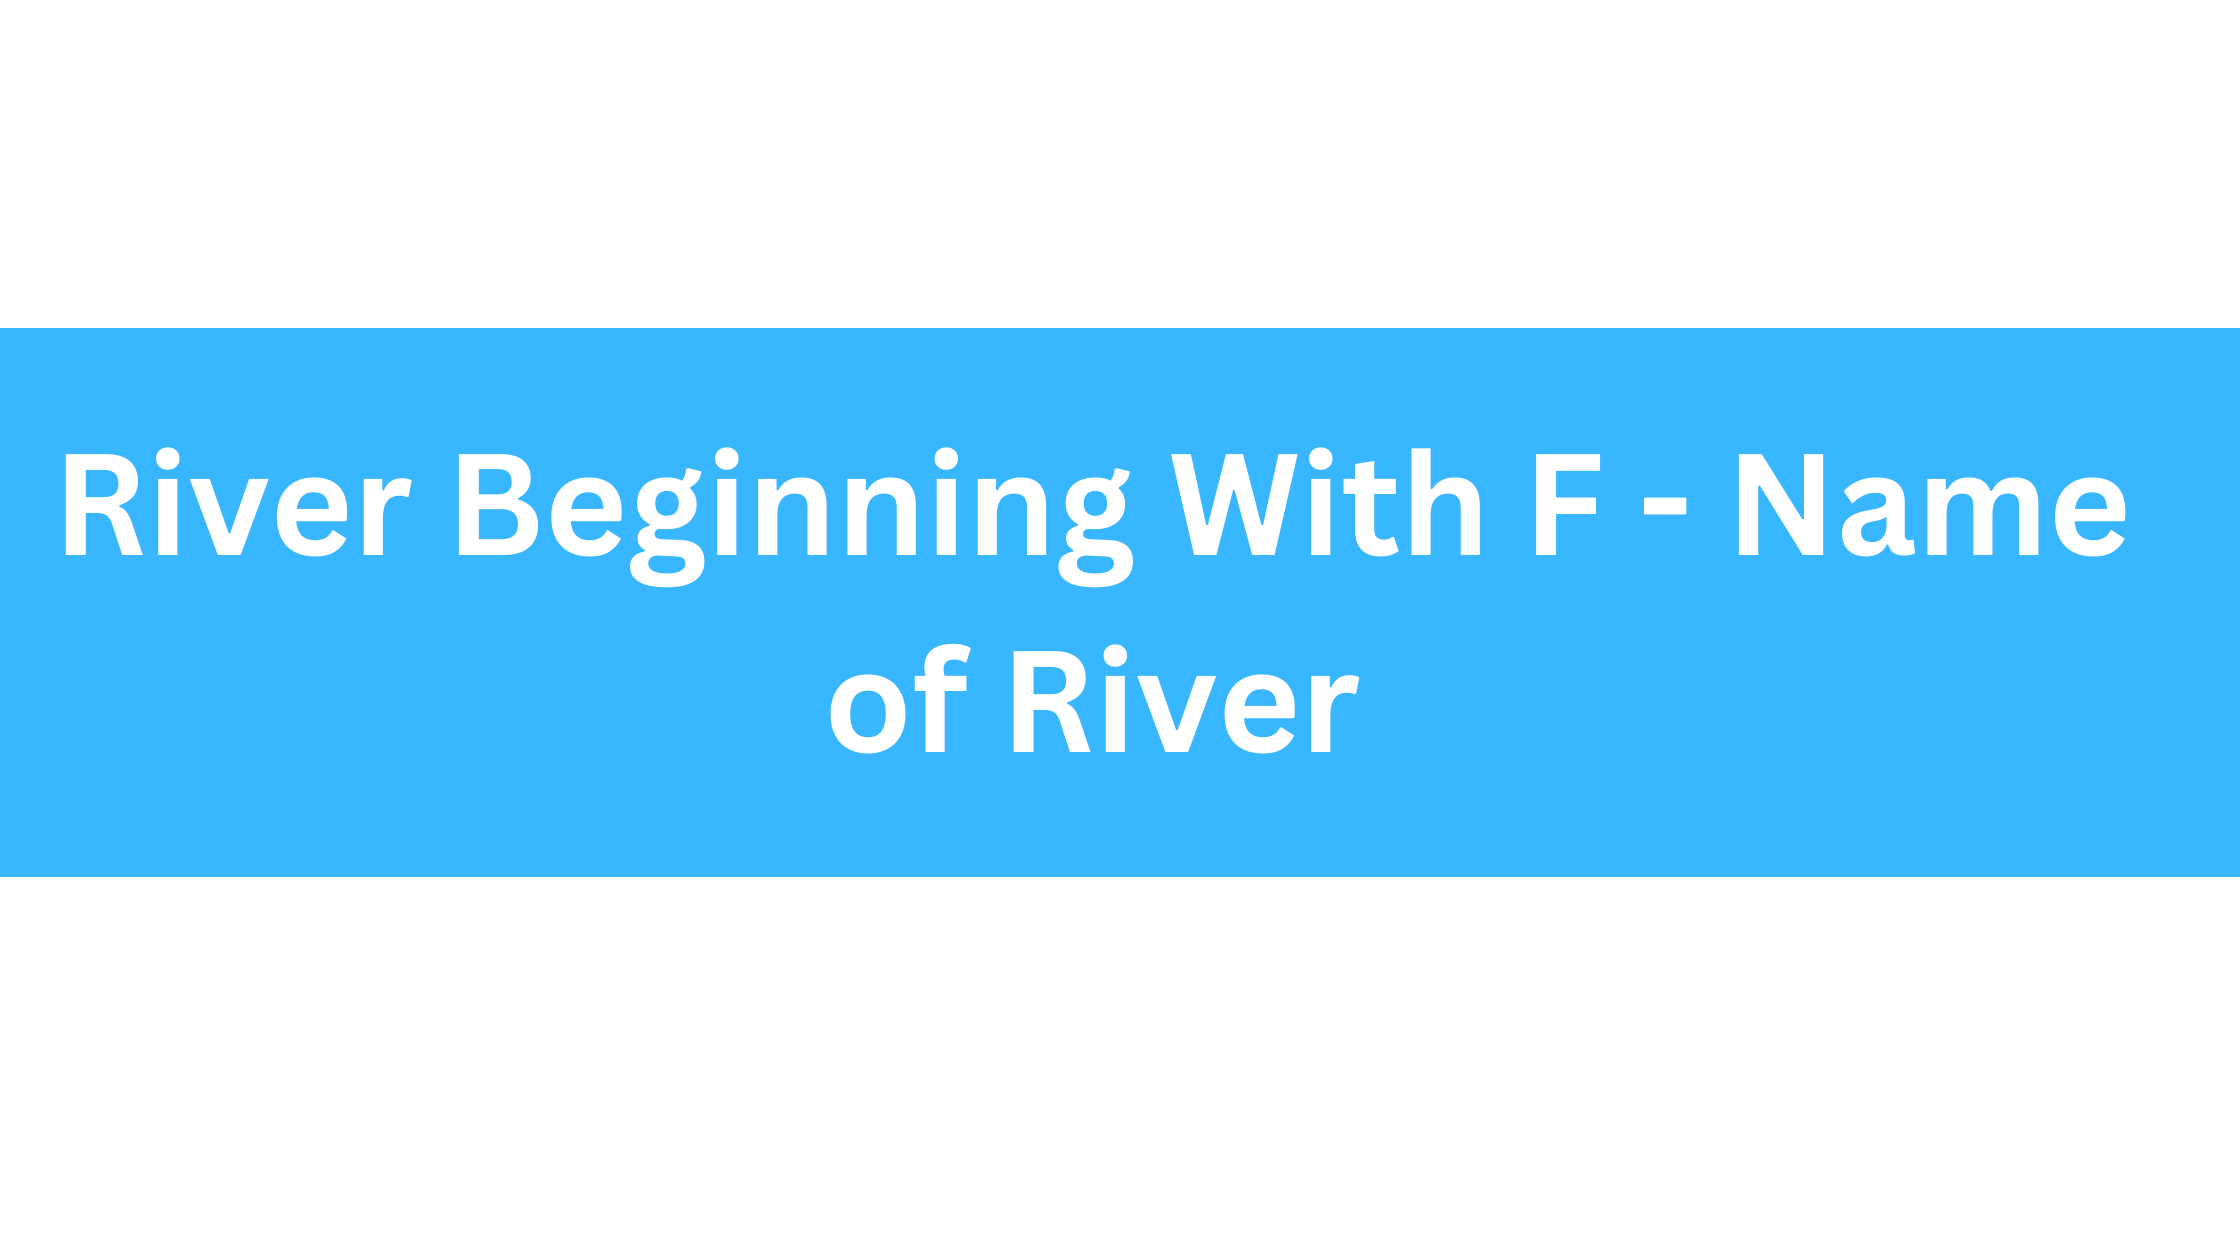 River Beginning With F